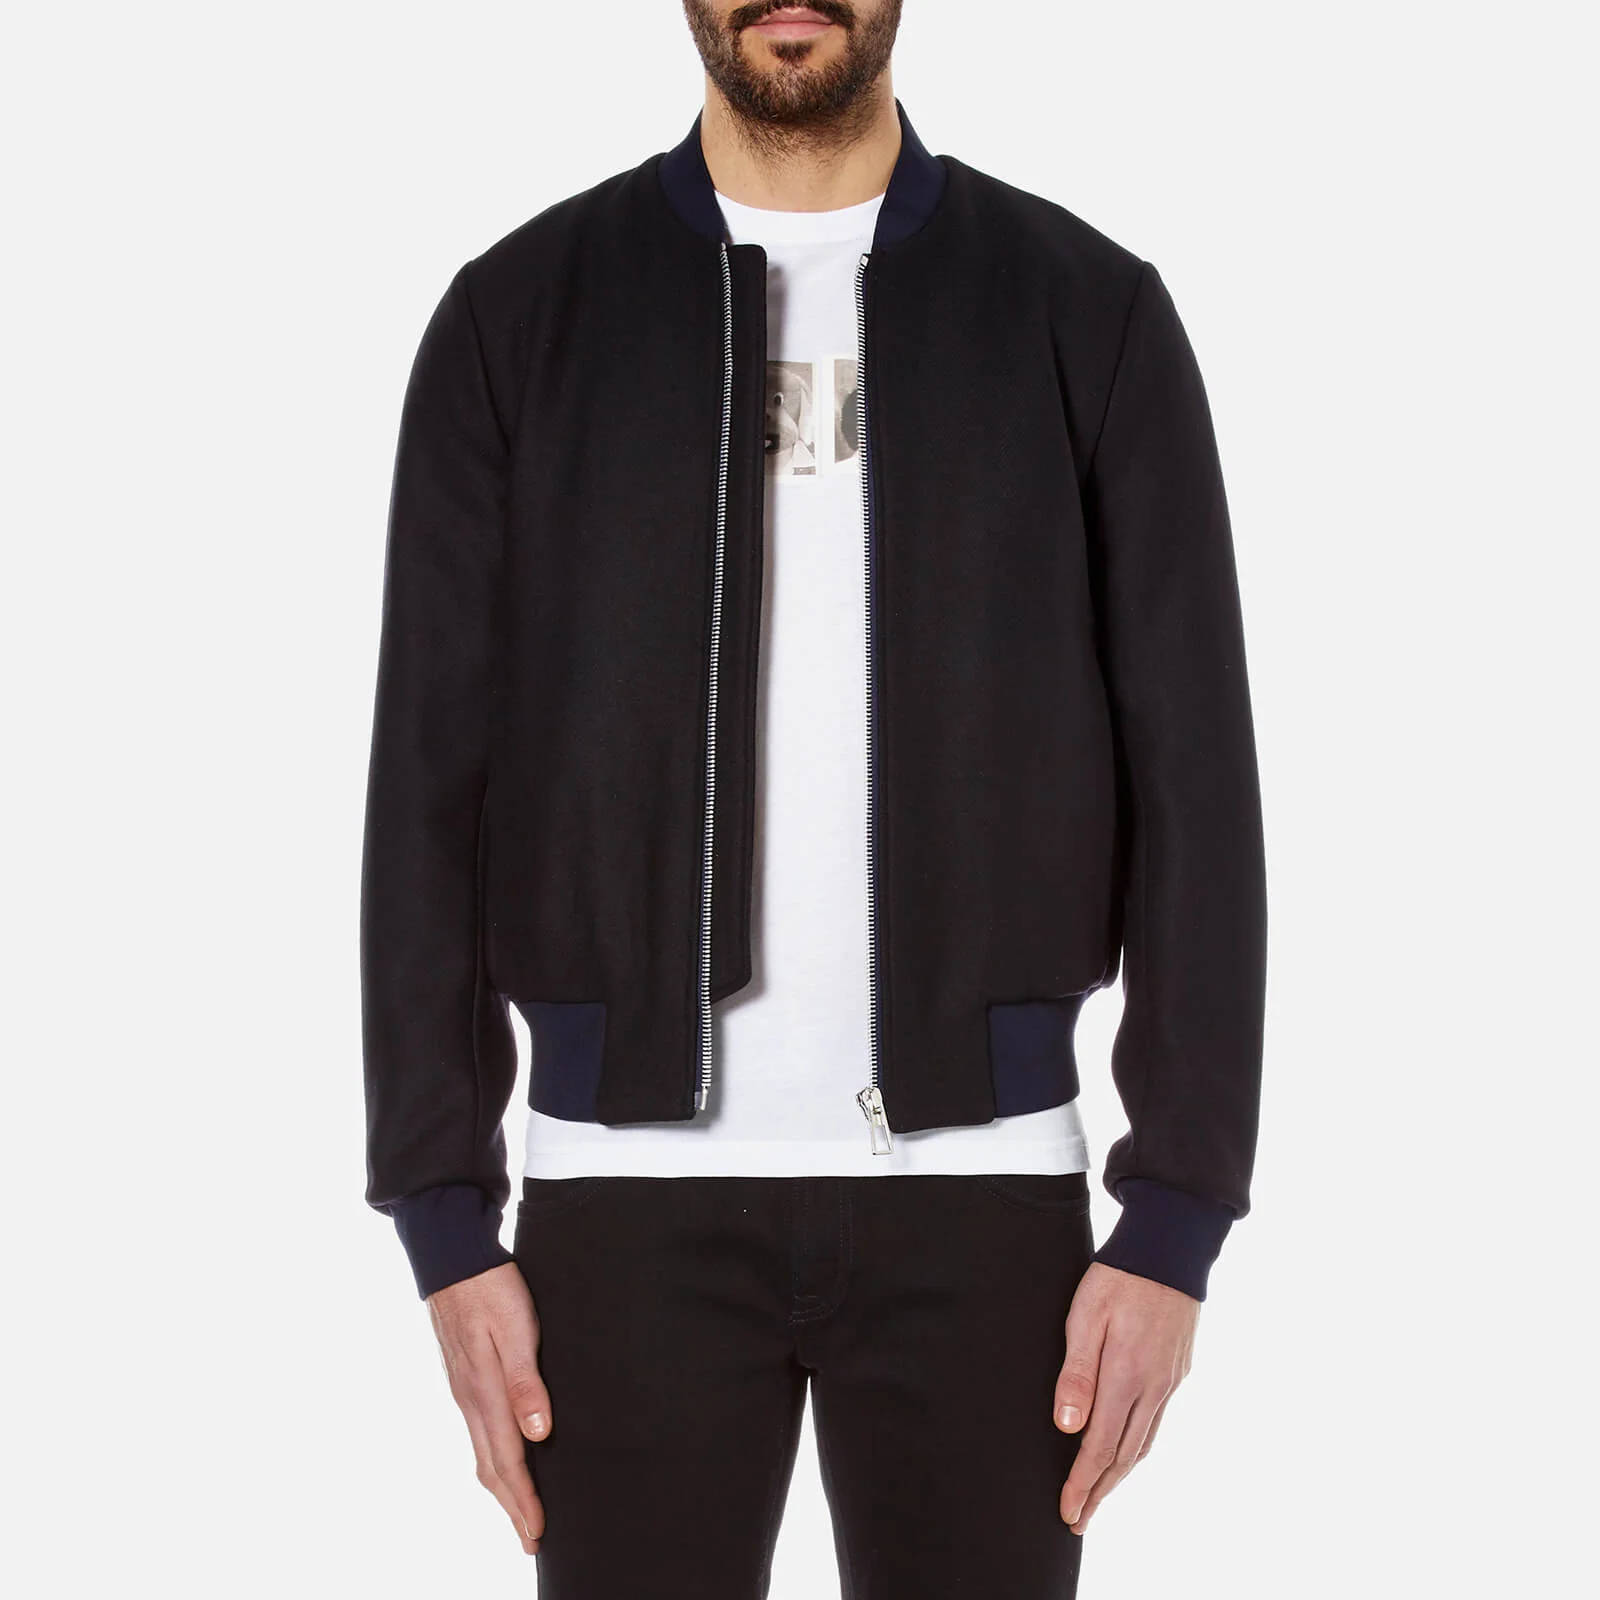 PS by Paul Smith Men's Bomber Jacket - Navy Image 1